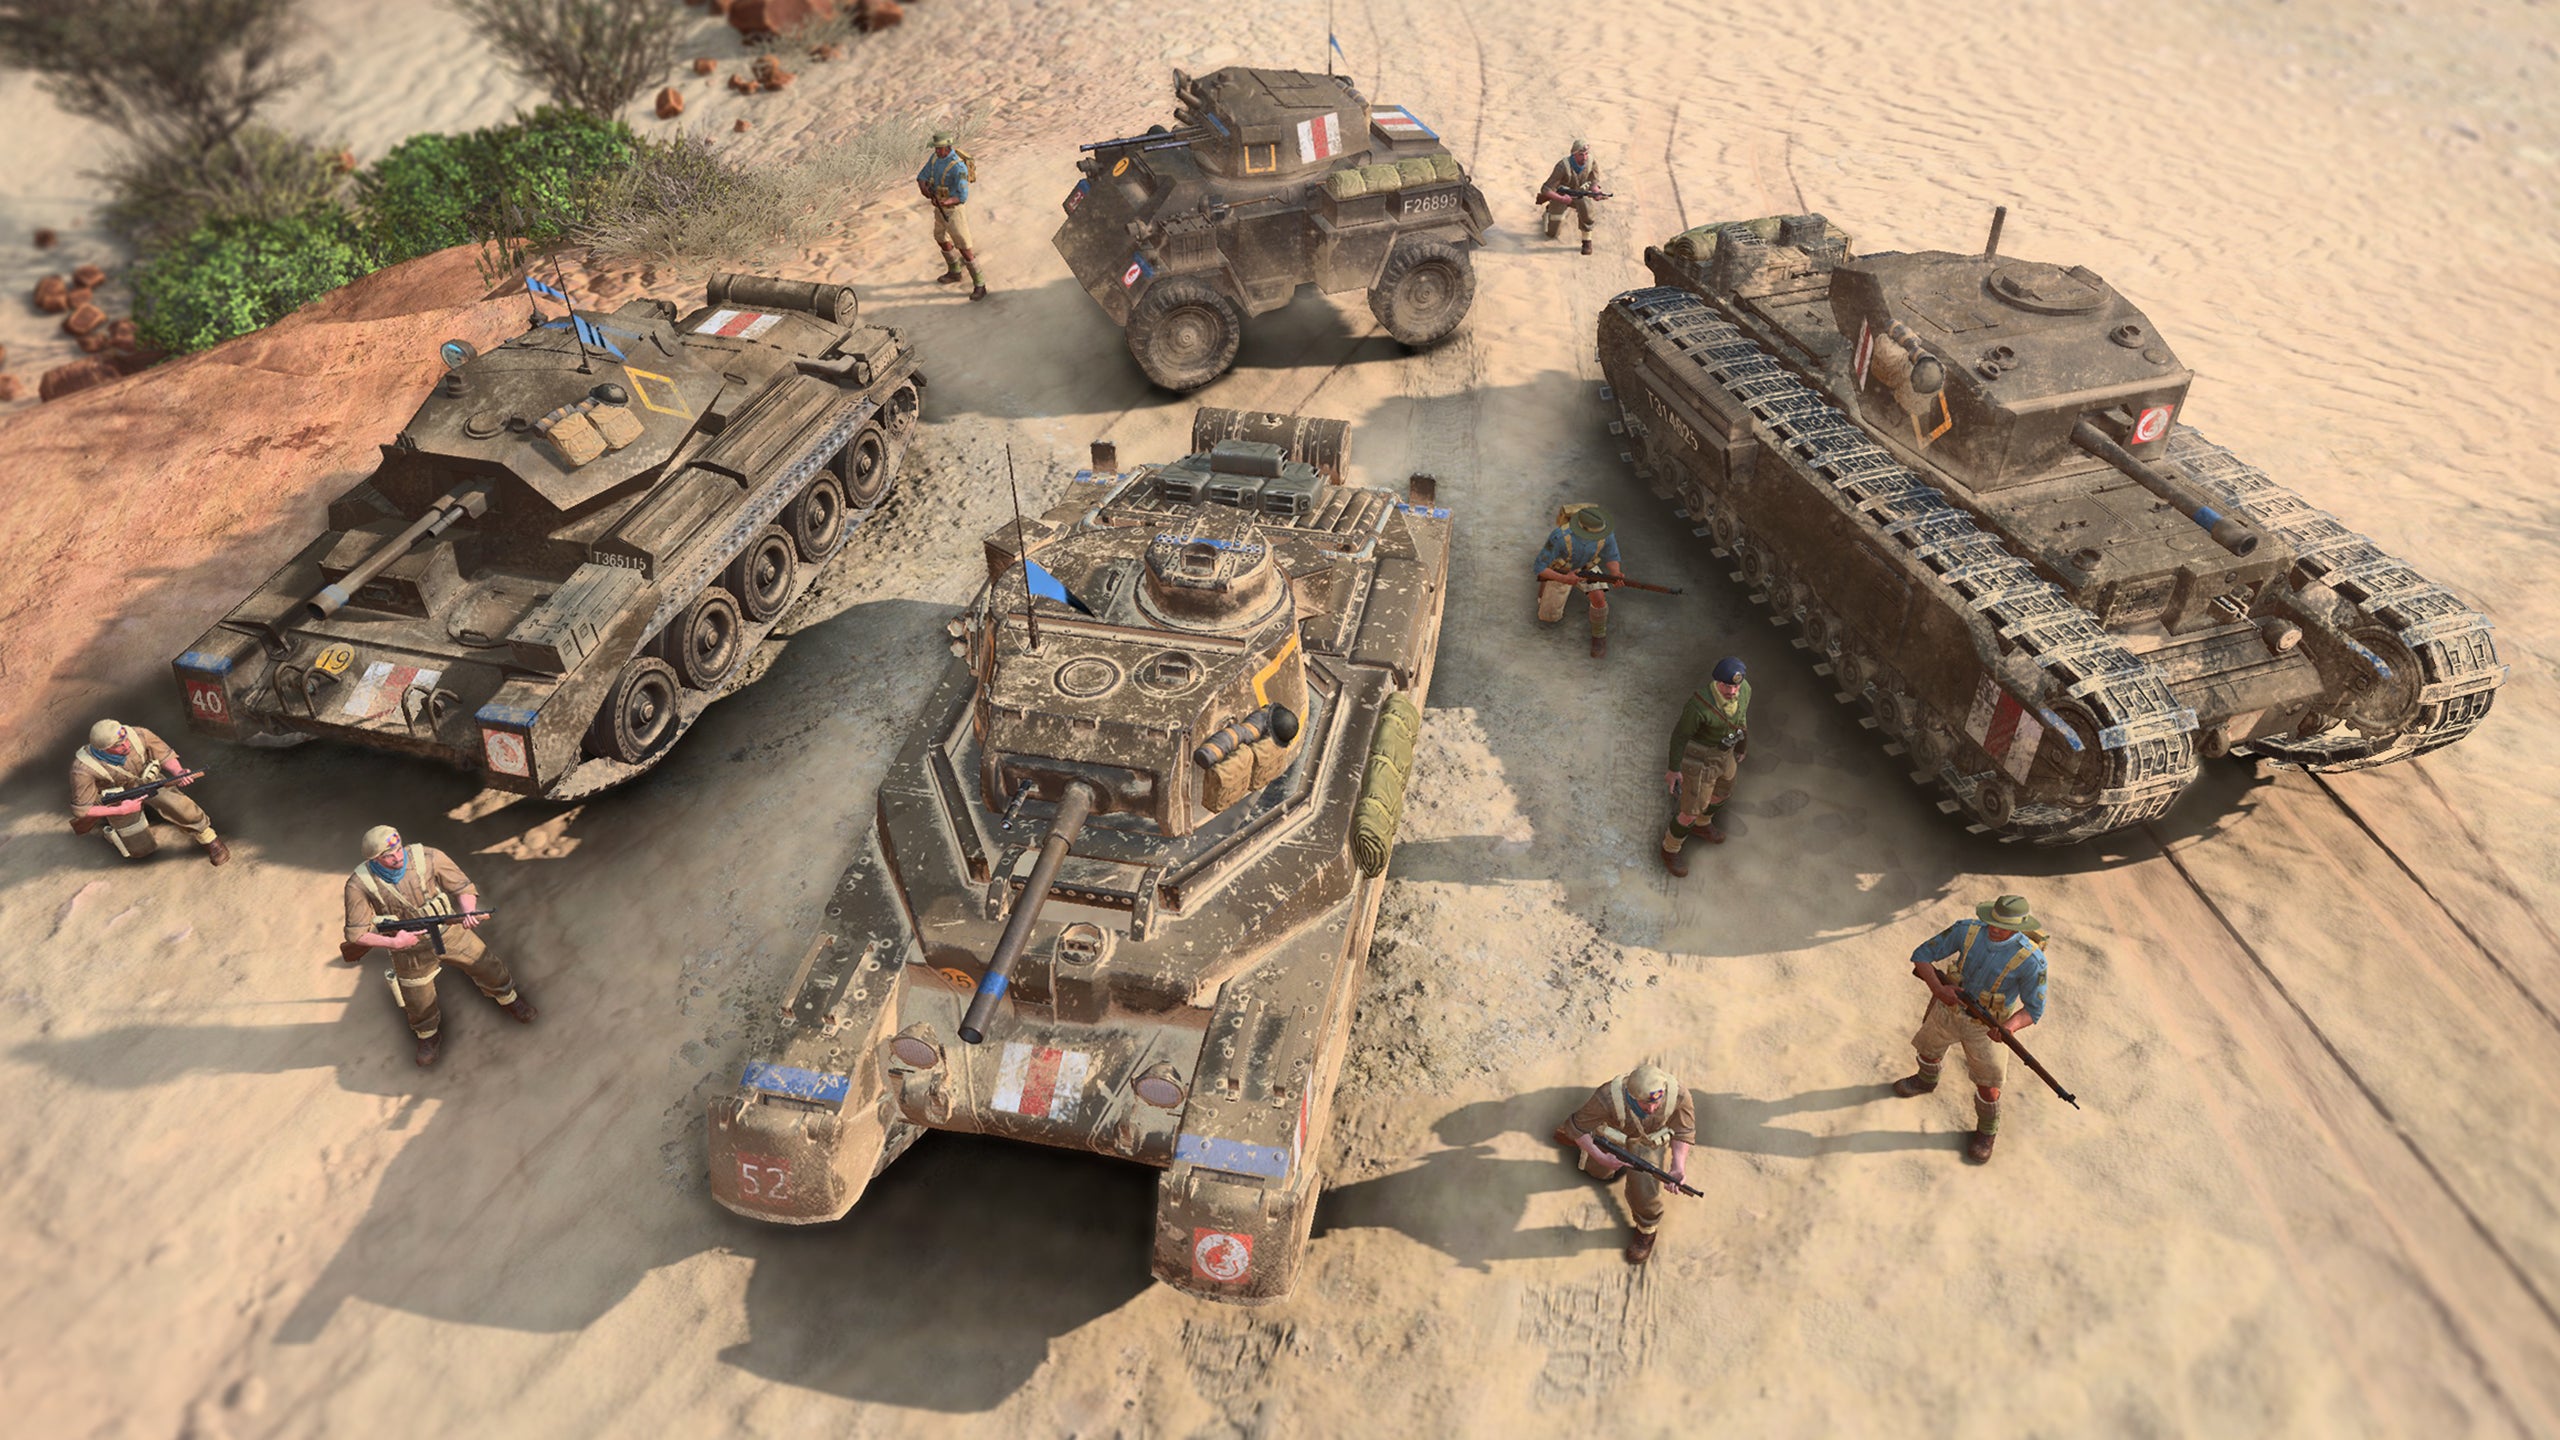 Company of Heroes 3 Preview - View of four British tanks and some infantry units in the desert